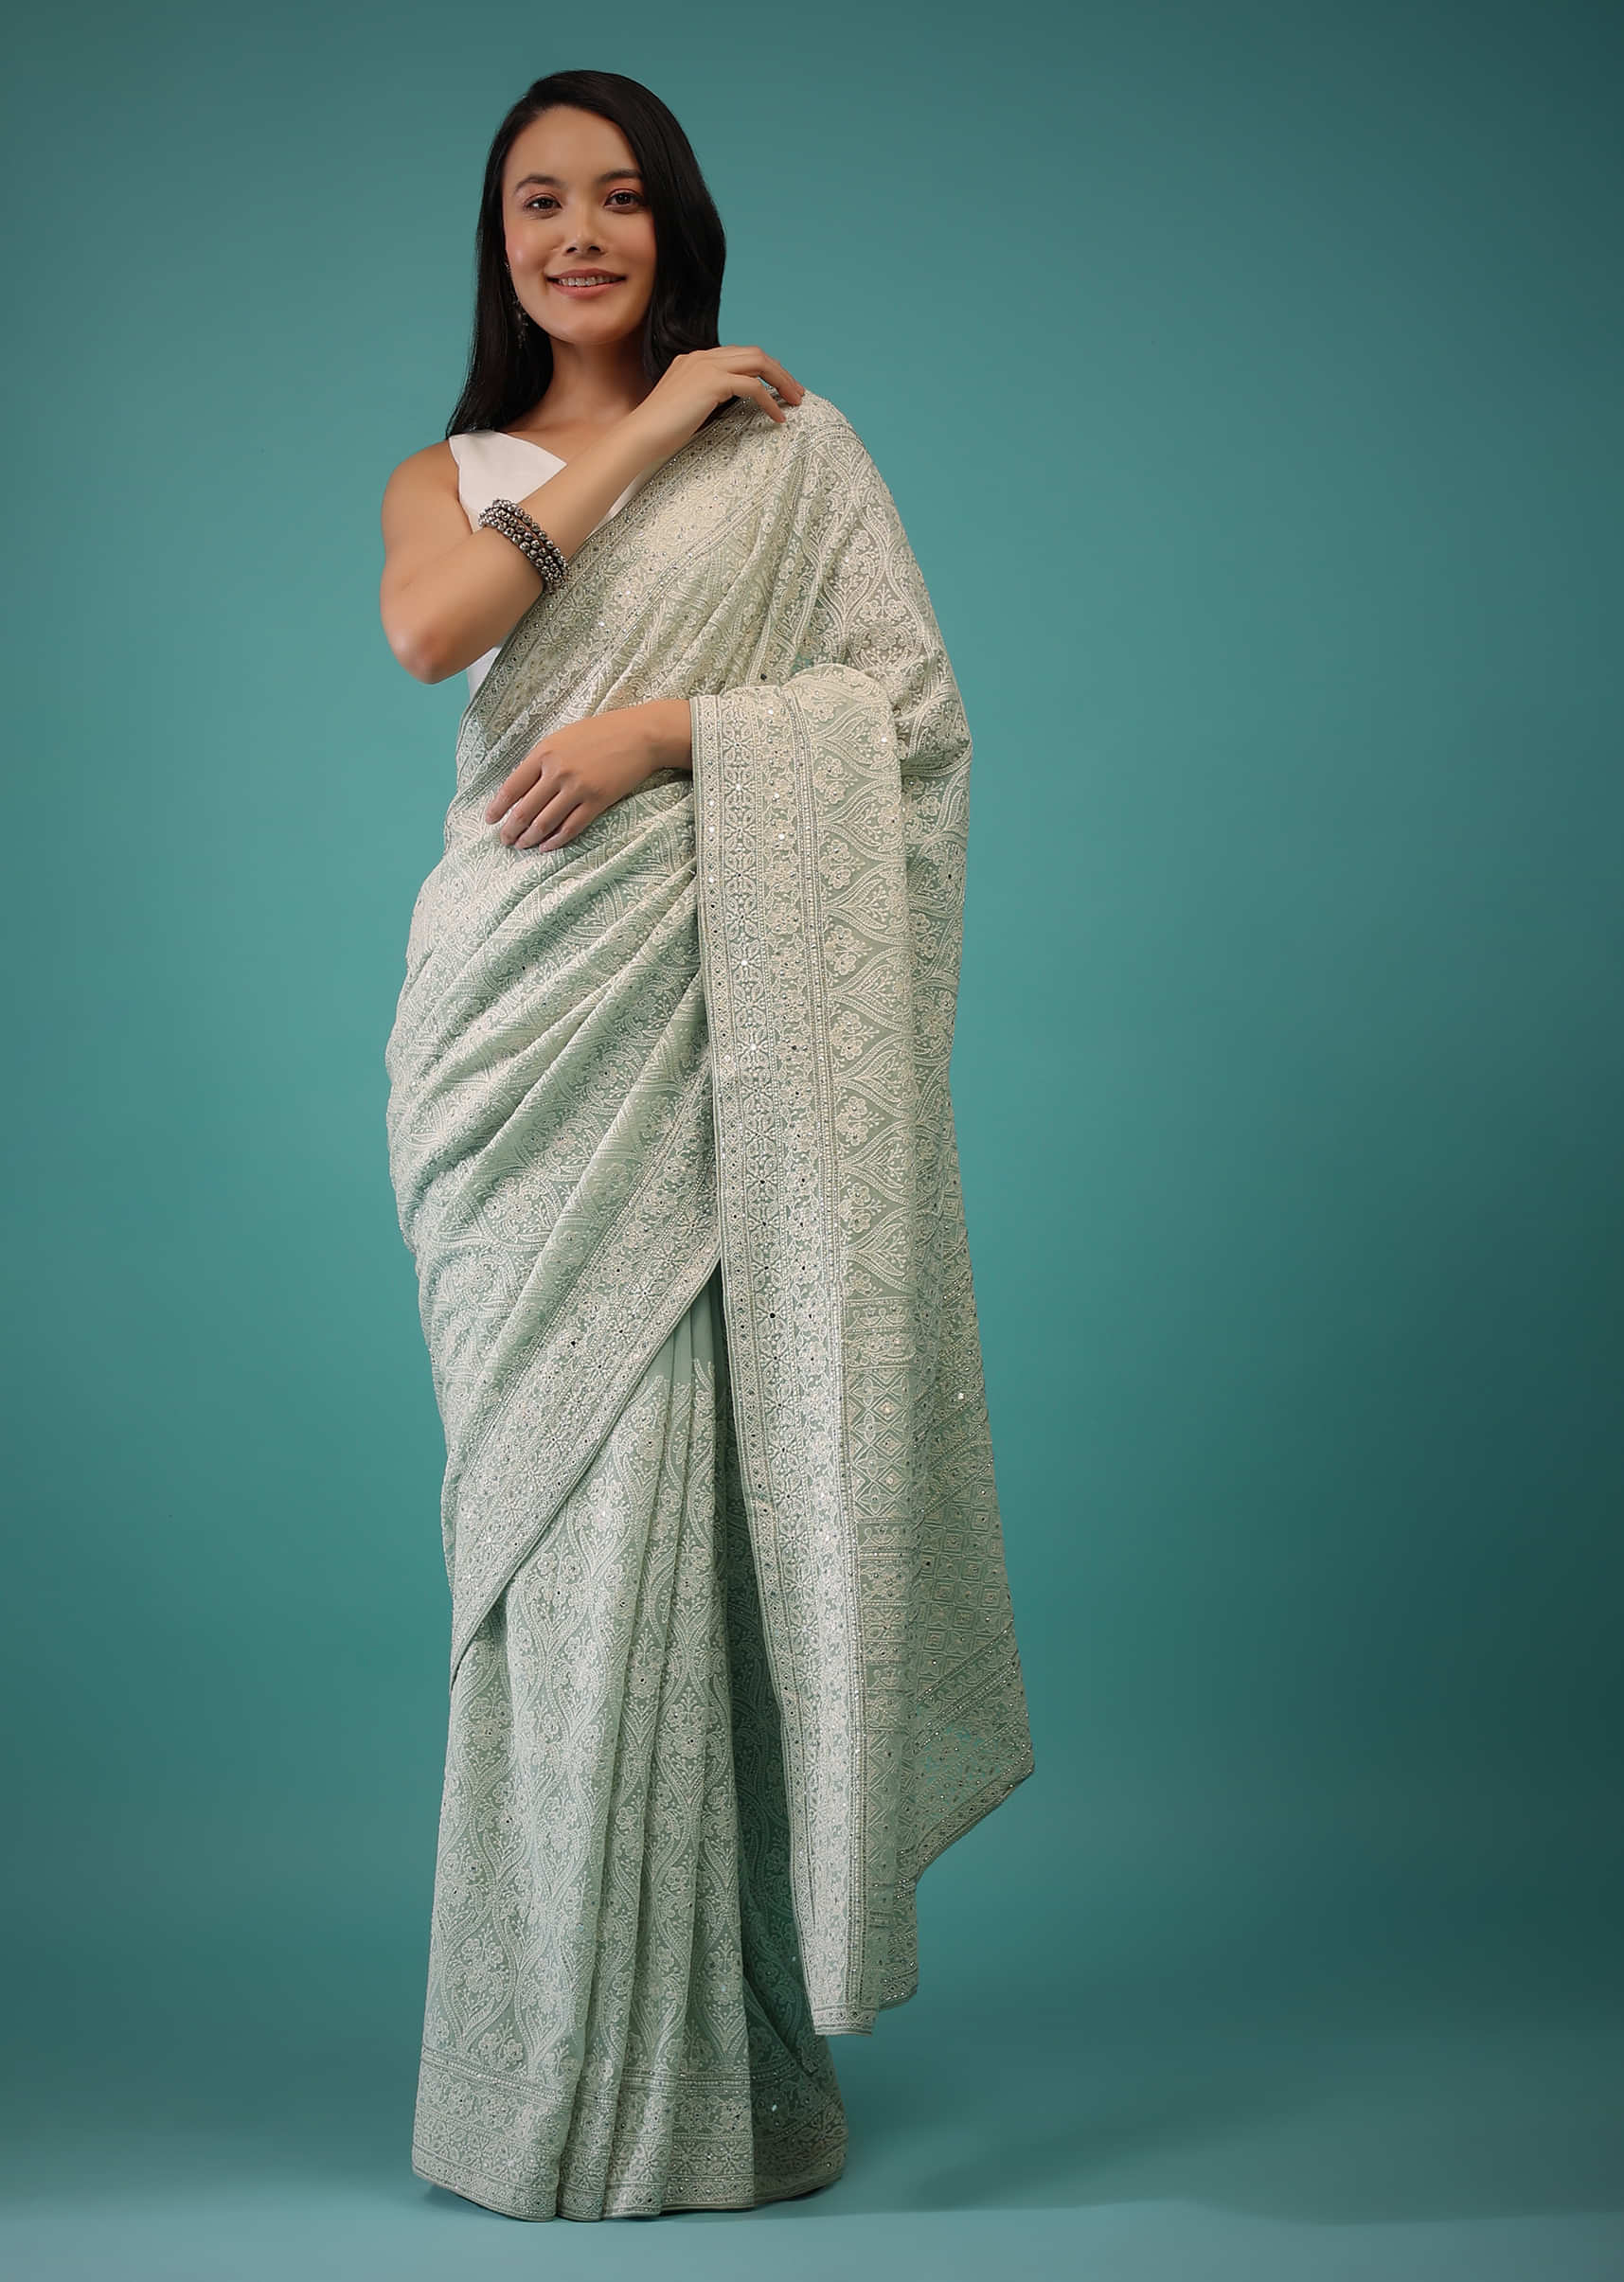 Mist Green Georgette Saree In Lucknowi Threadwork In A Moroccan Jaal, It Has Mirror Embroidery Detailing On The Pallu